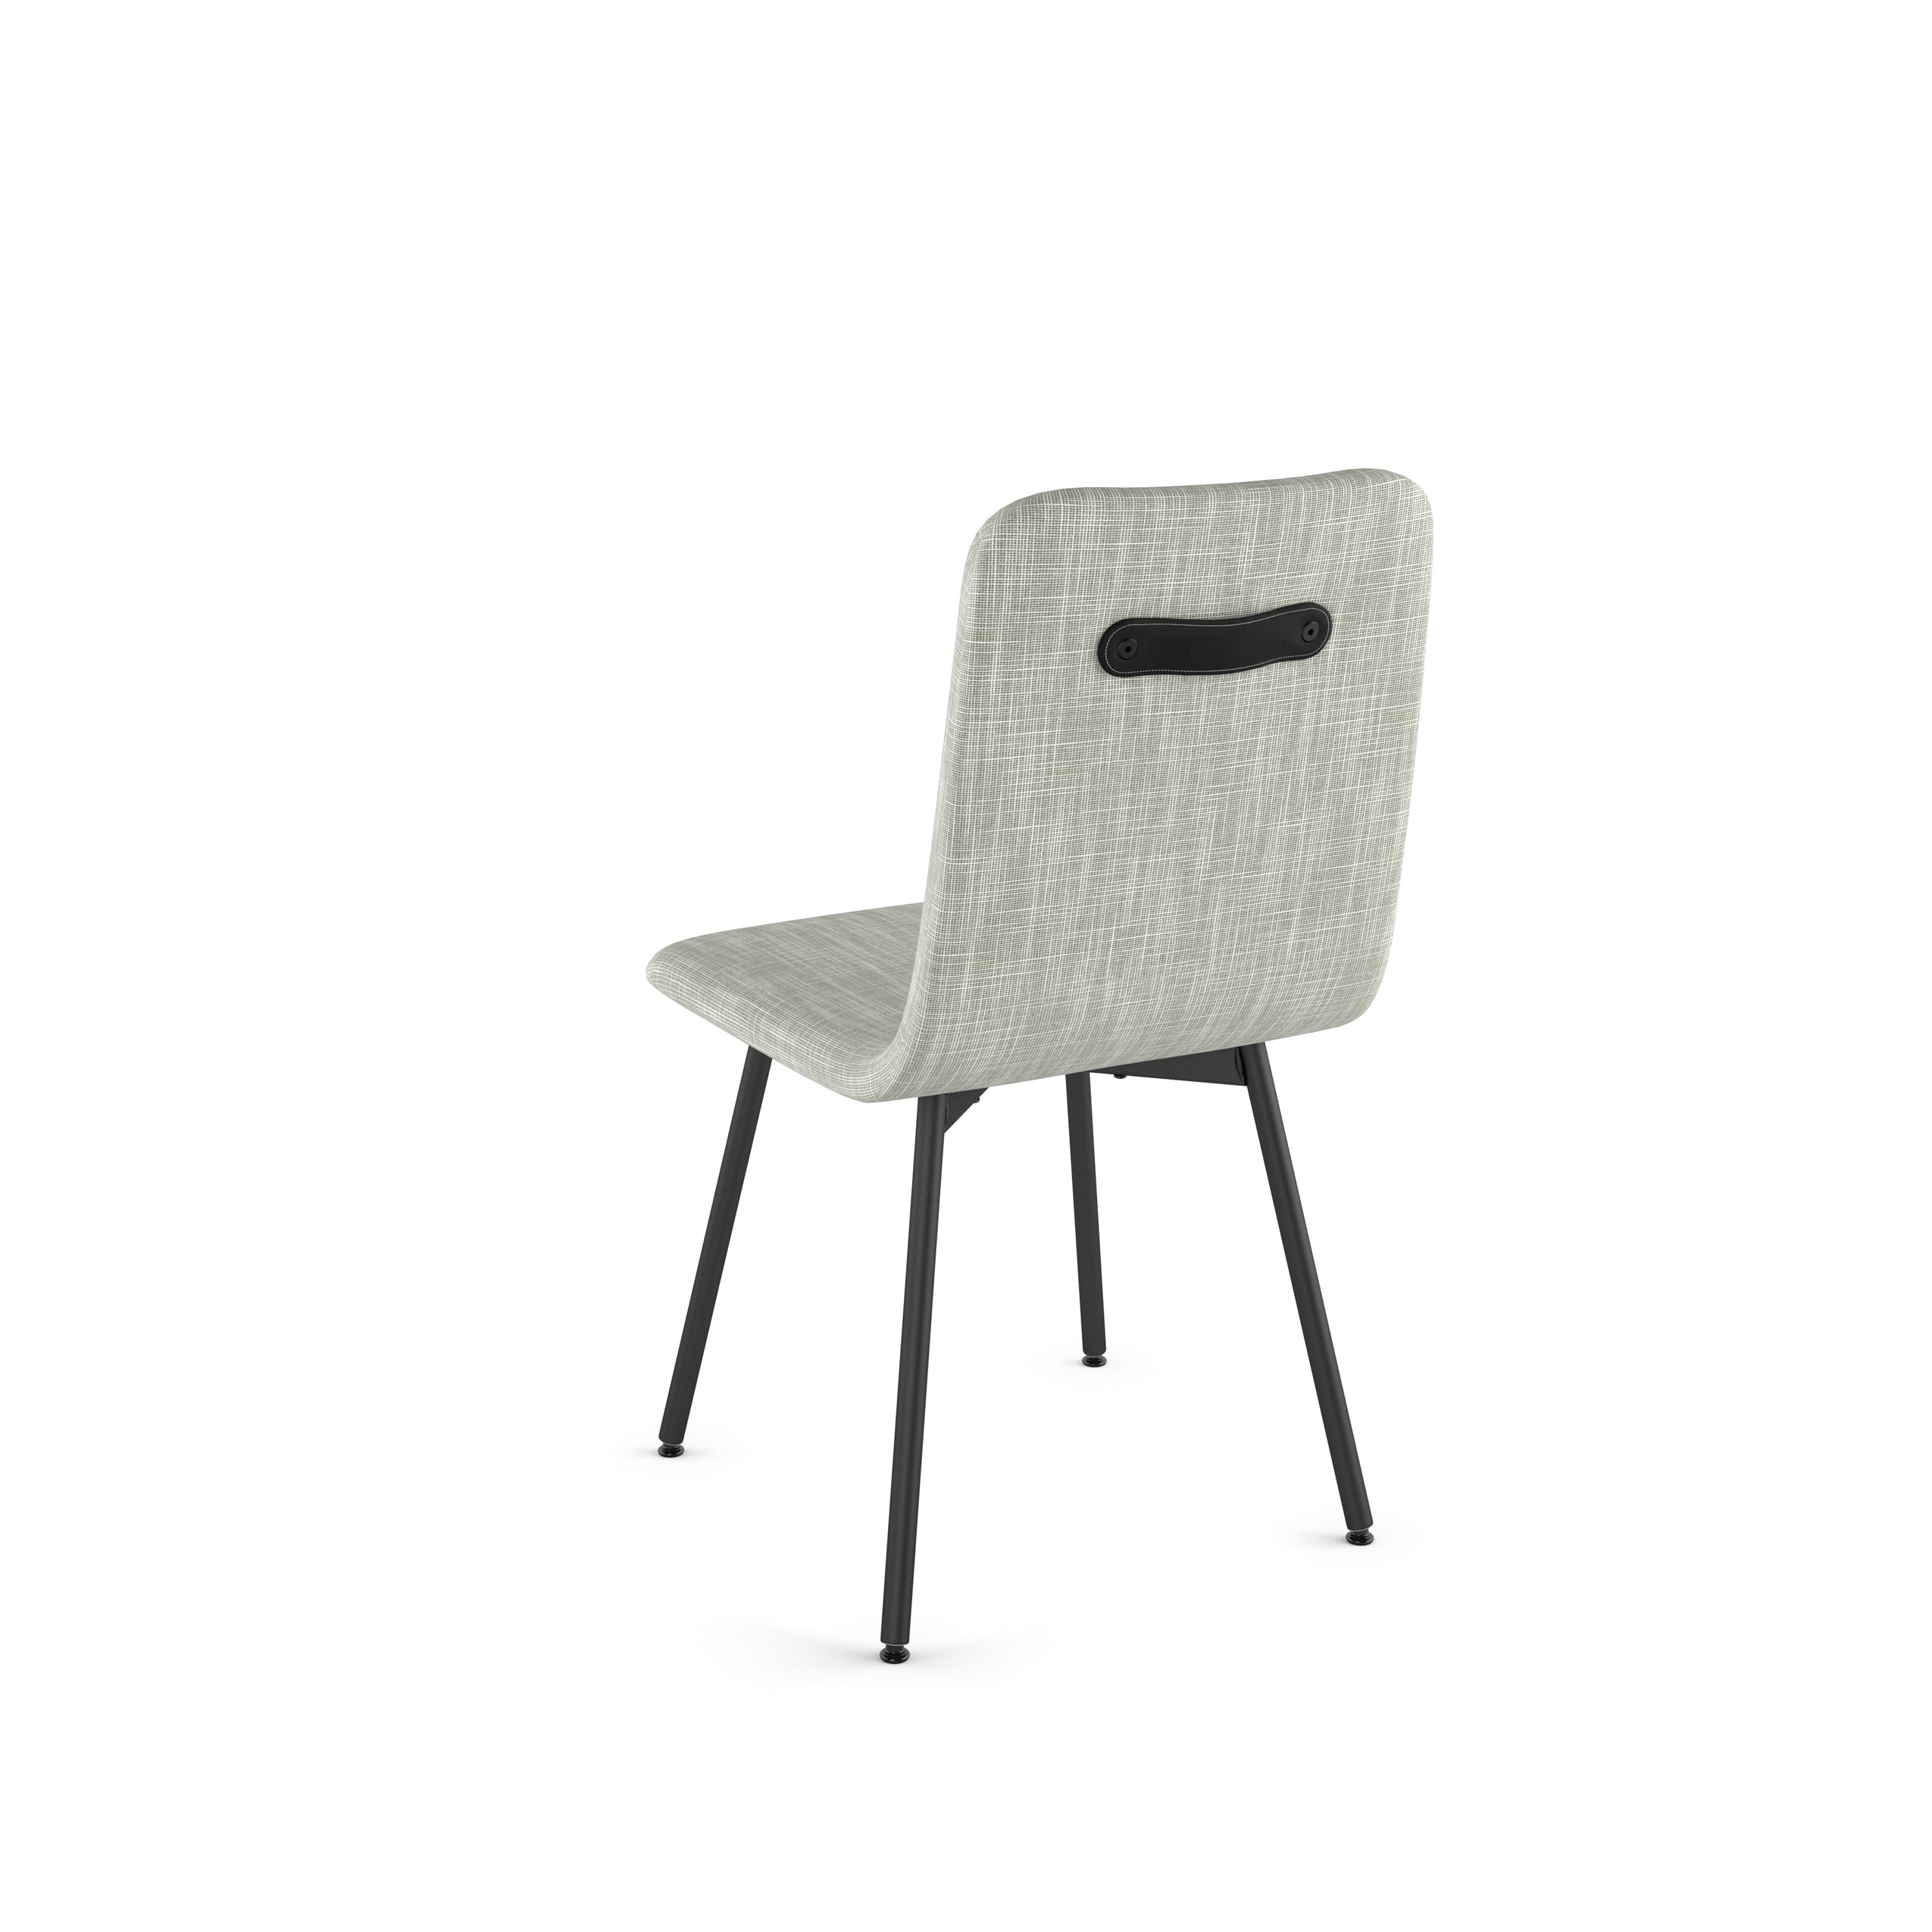 Bray Dining Chair